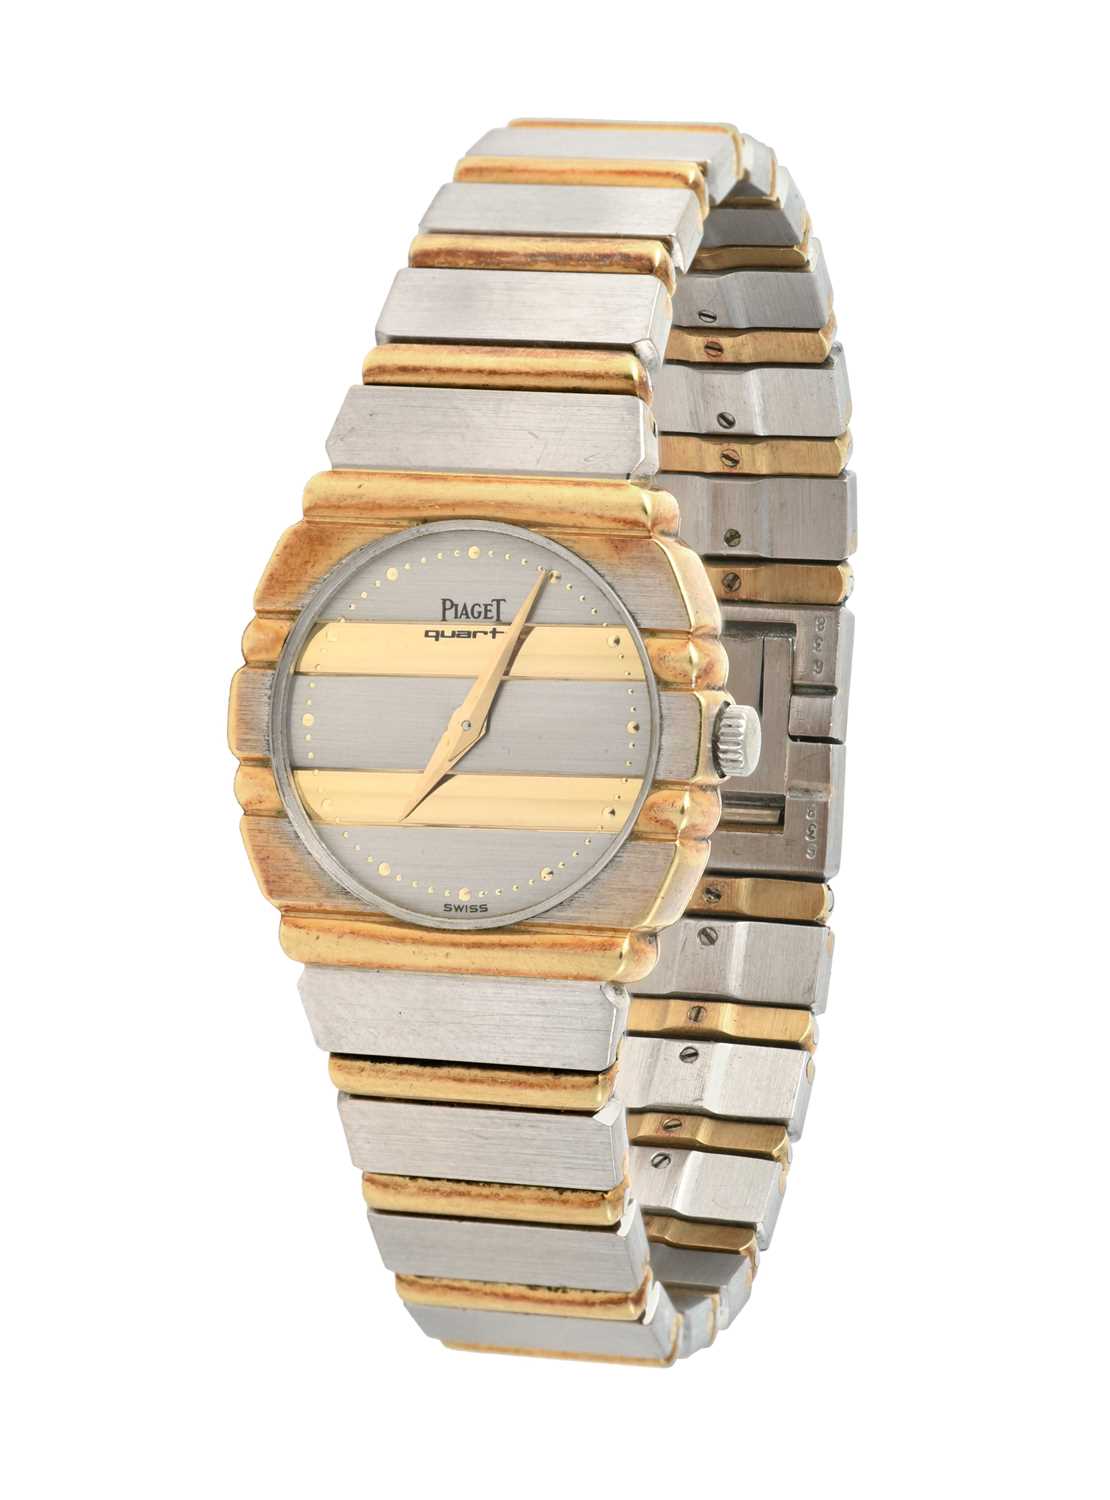 Piaget: A Lady's 18 Carat Yellow and White Gold Wristwatch signed Piaget, model: Polo, ref: 861C701,